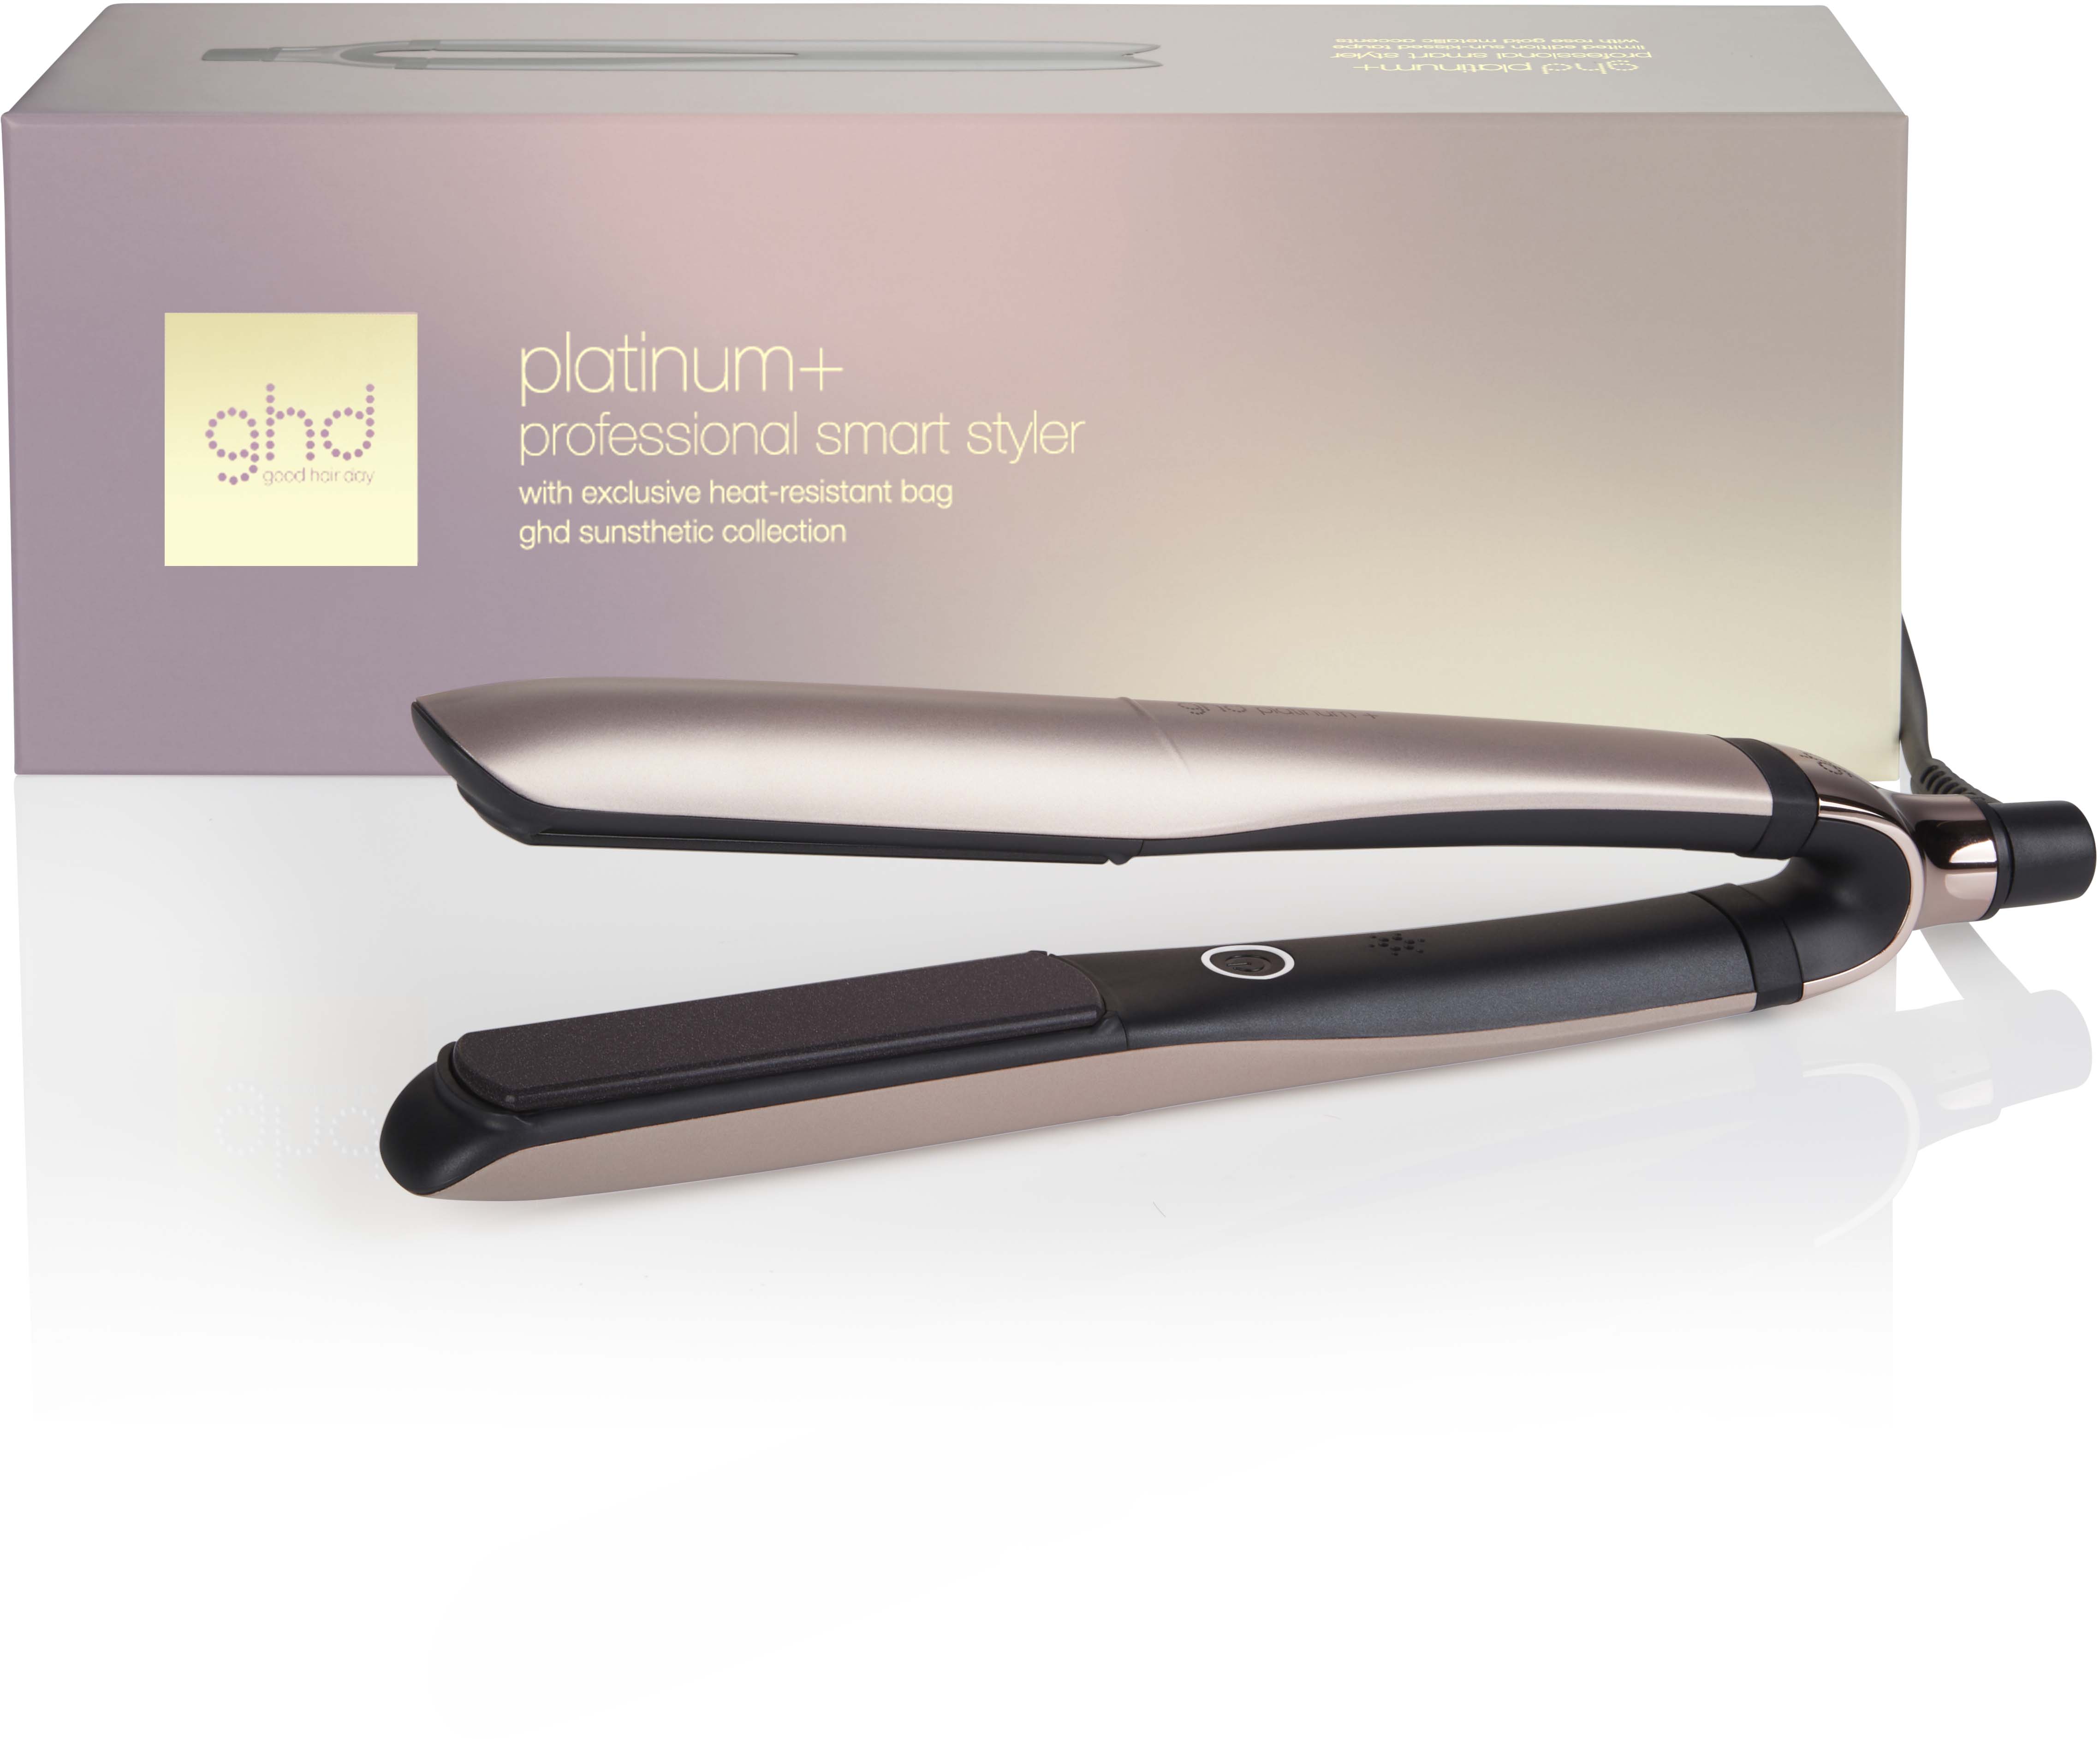 ghd Platinum+ Sunsthetic Collection Professional Smart Styler | lyko.com